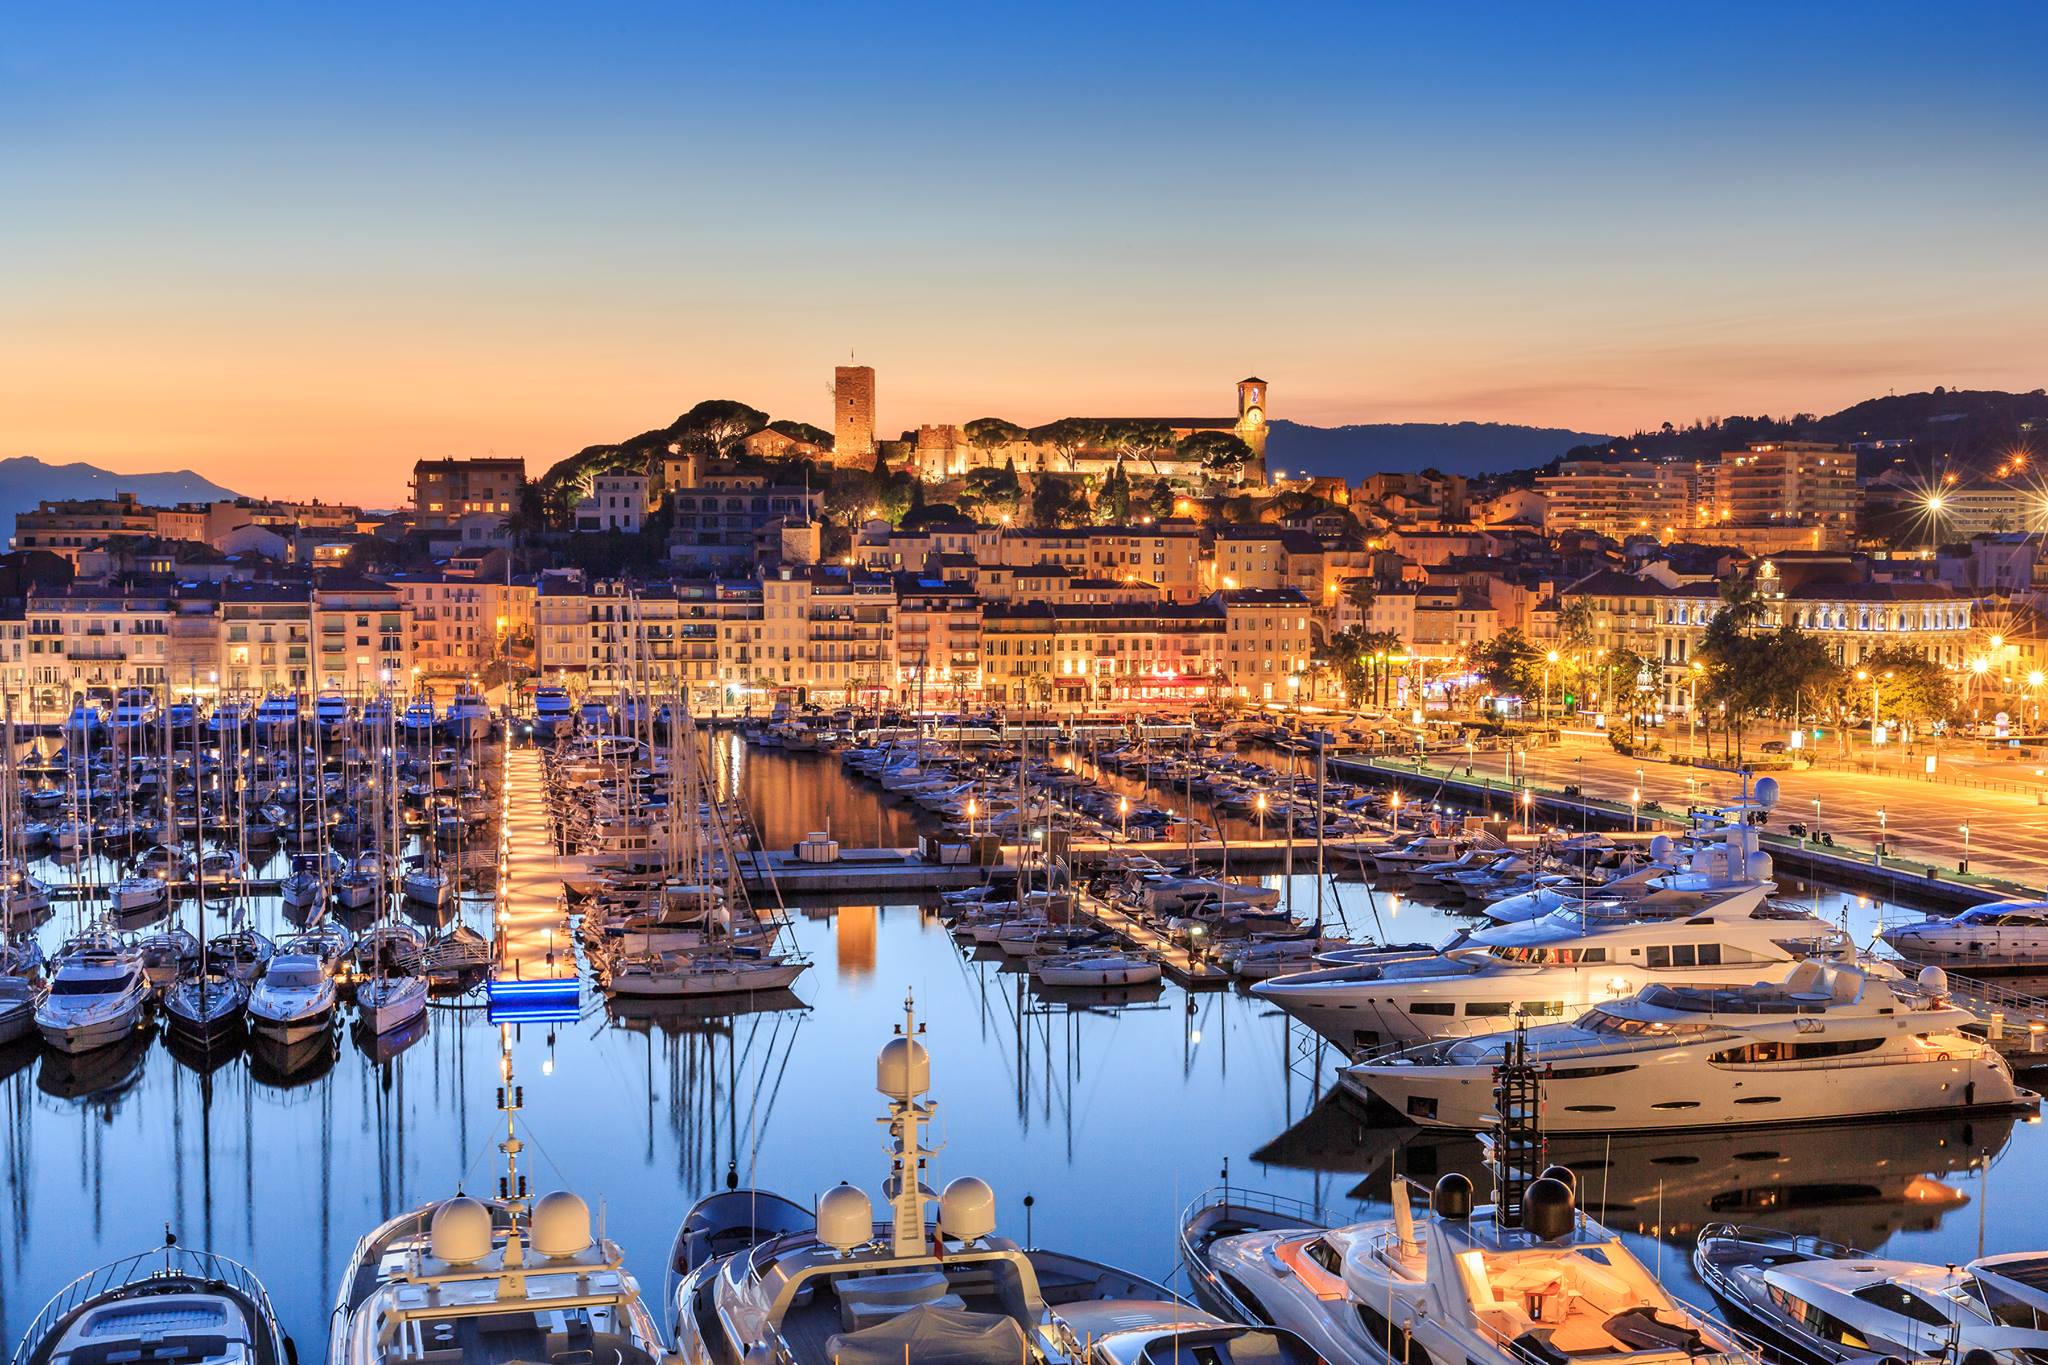 CANNES YACHTING FESTIVAL